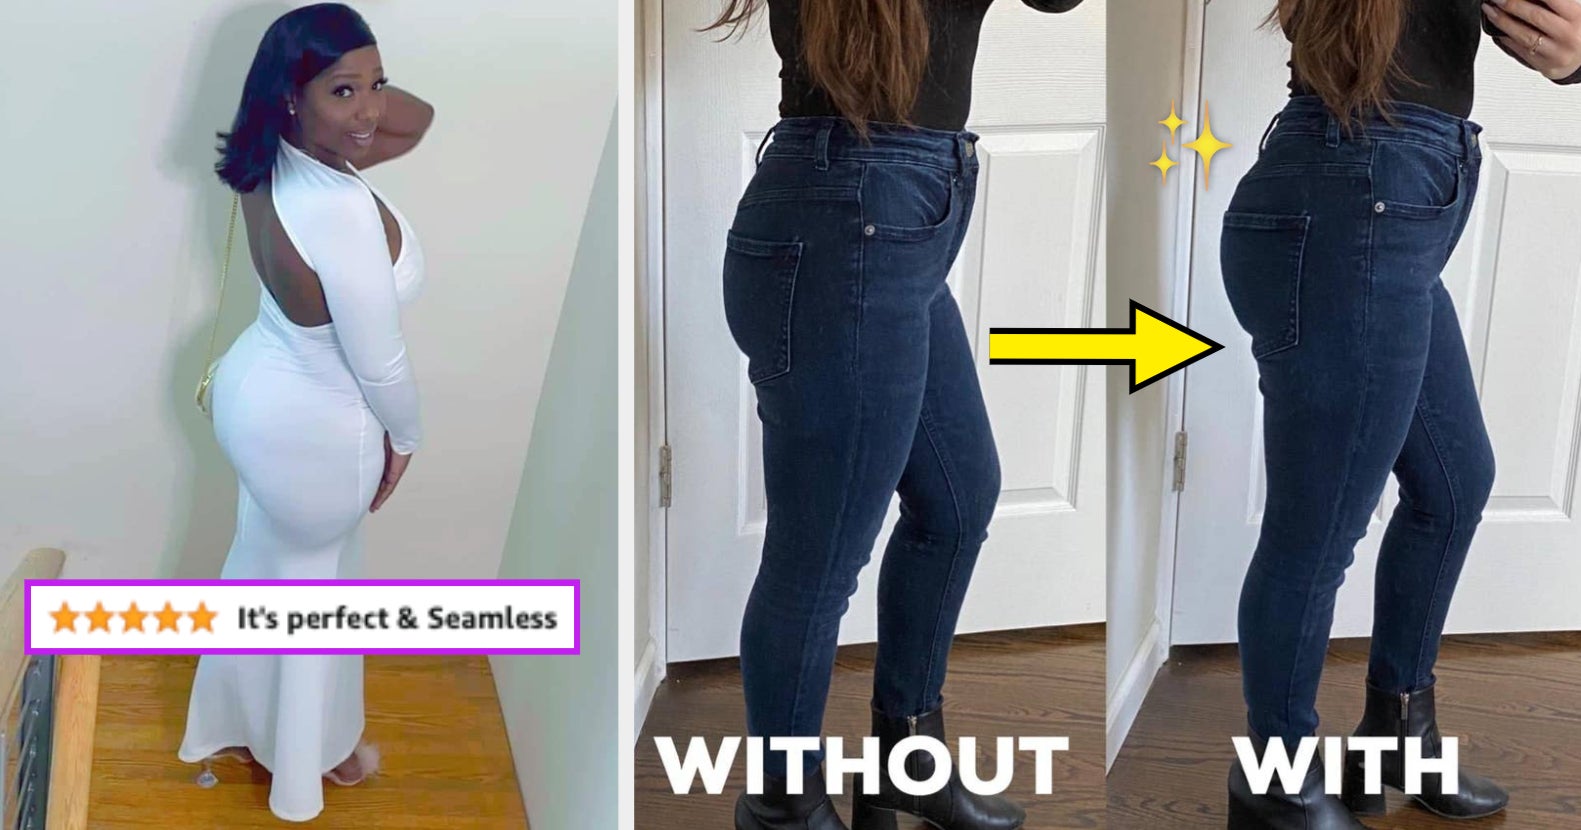 Ladies, look curvier with these butt and hip pads that're less